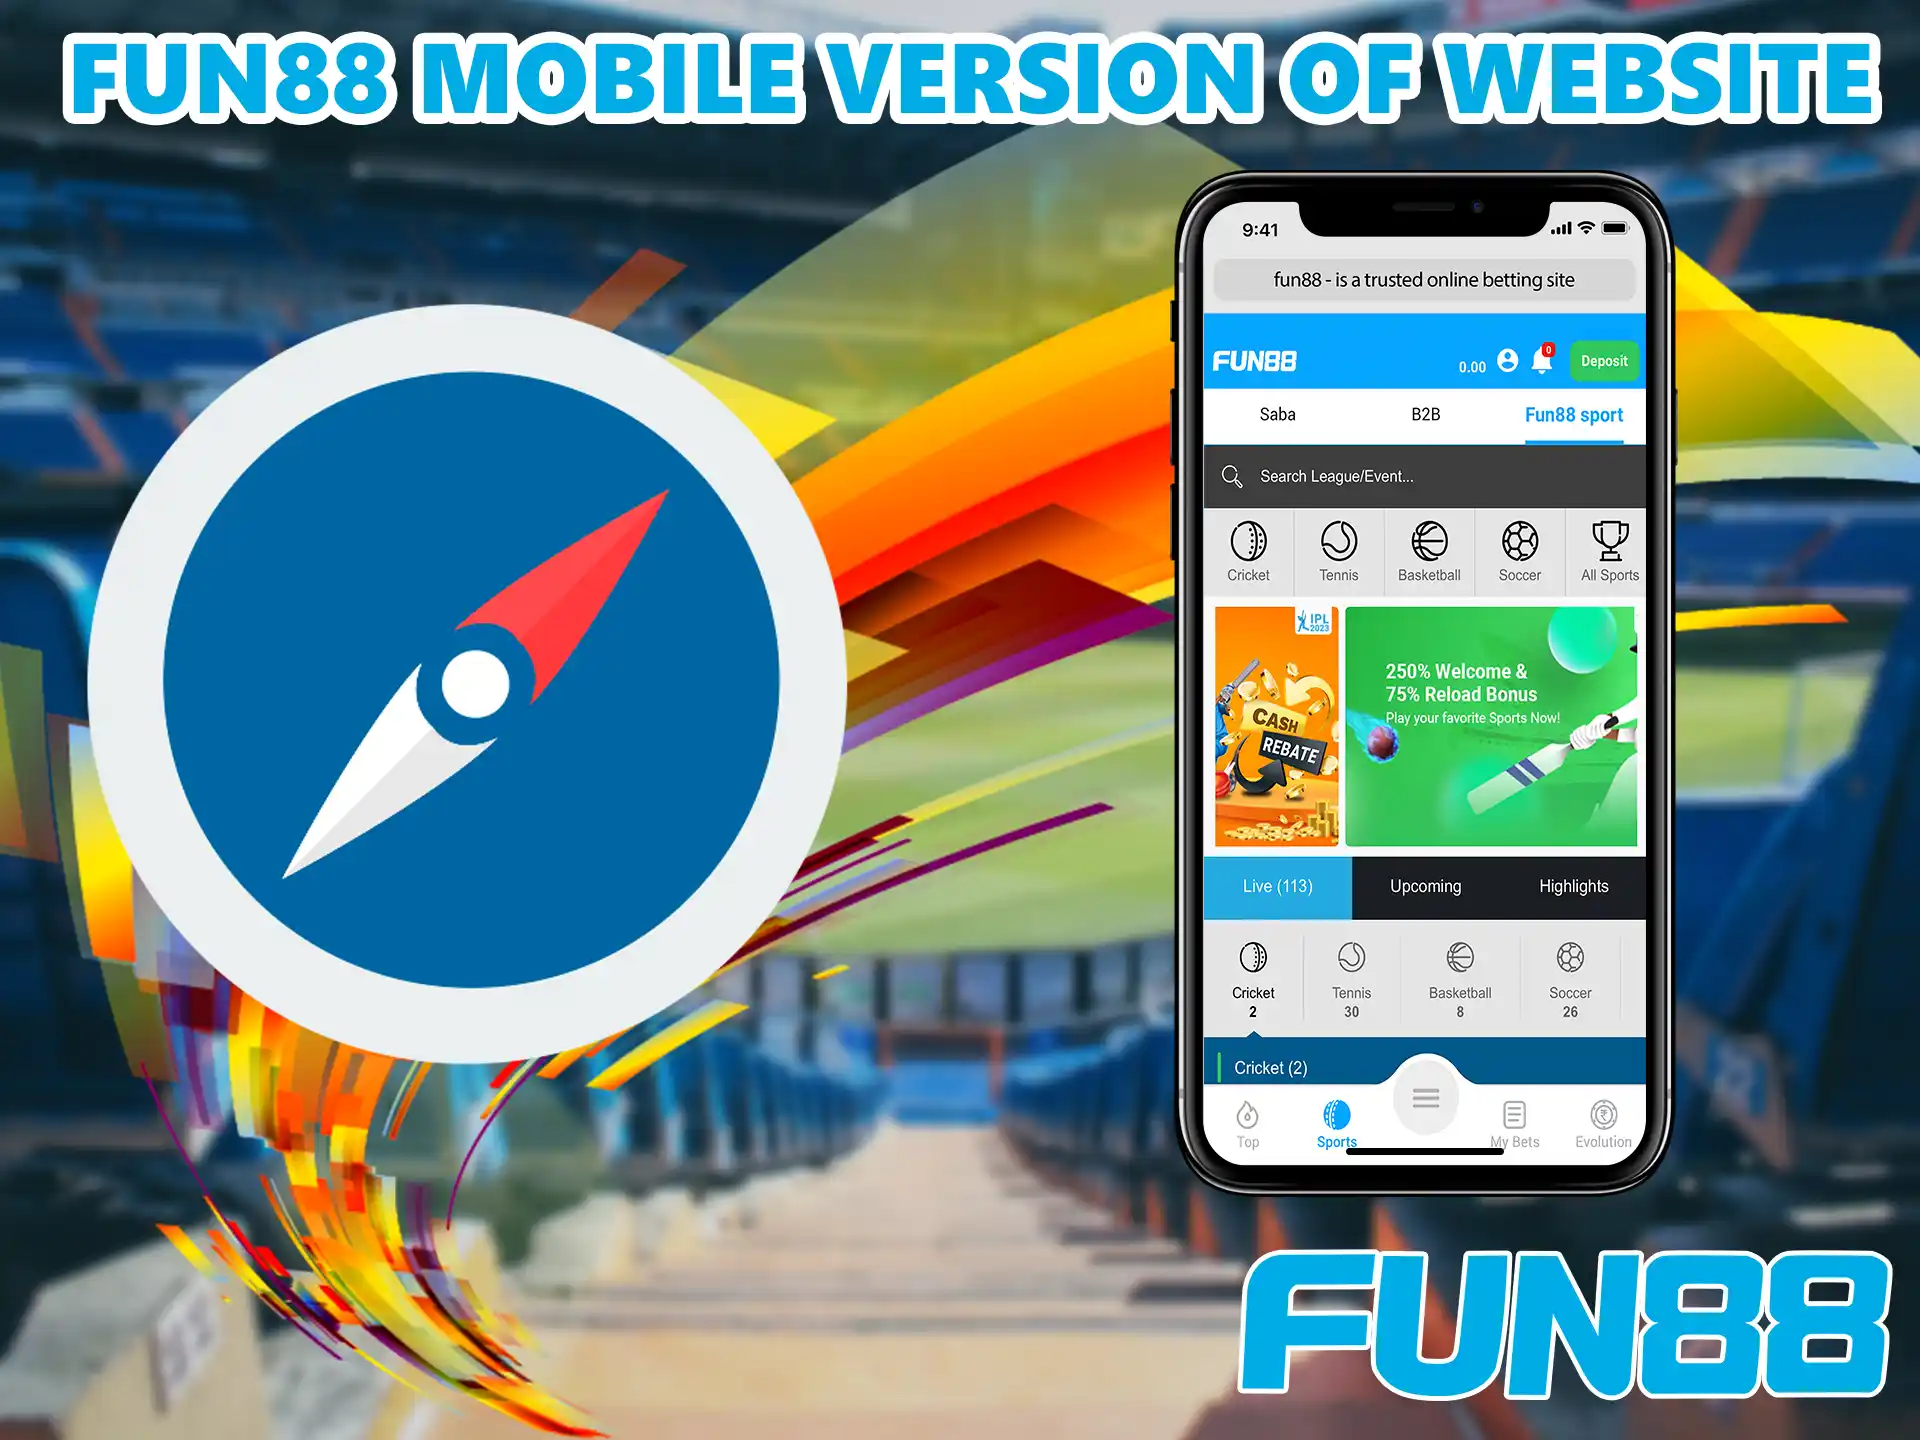 This version works without installing the Fun88 app, just download it in your browser, it is safe and works on all screen resolutions.